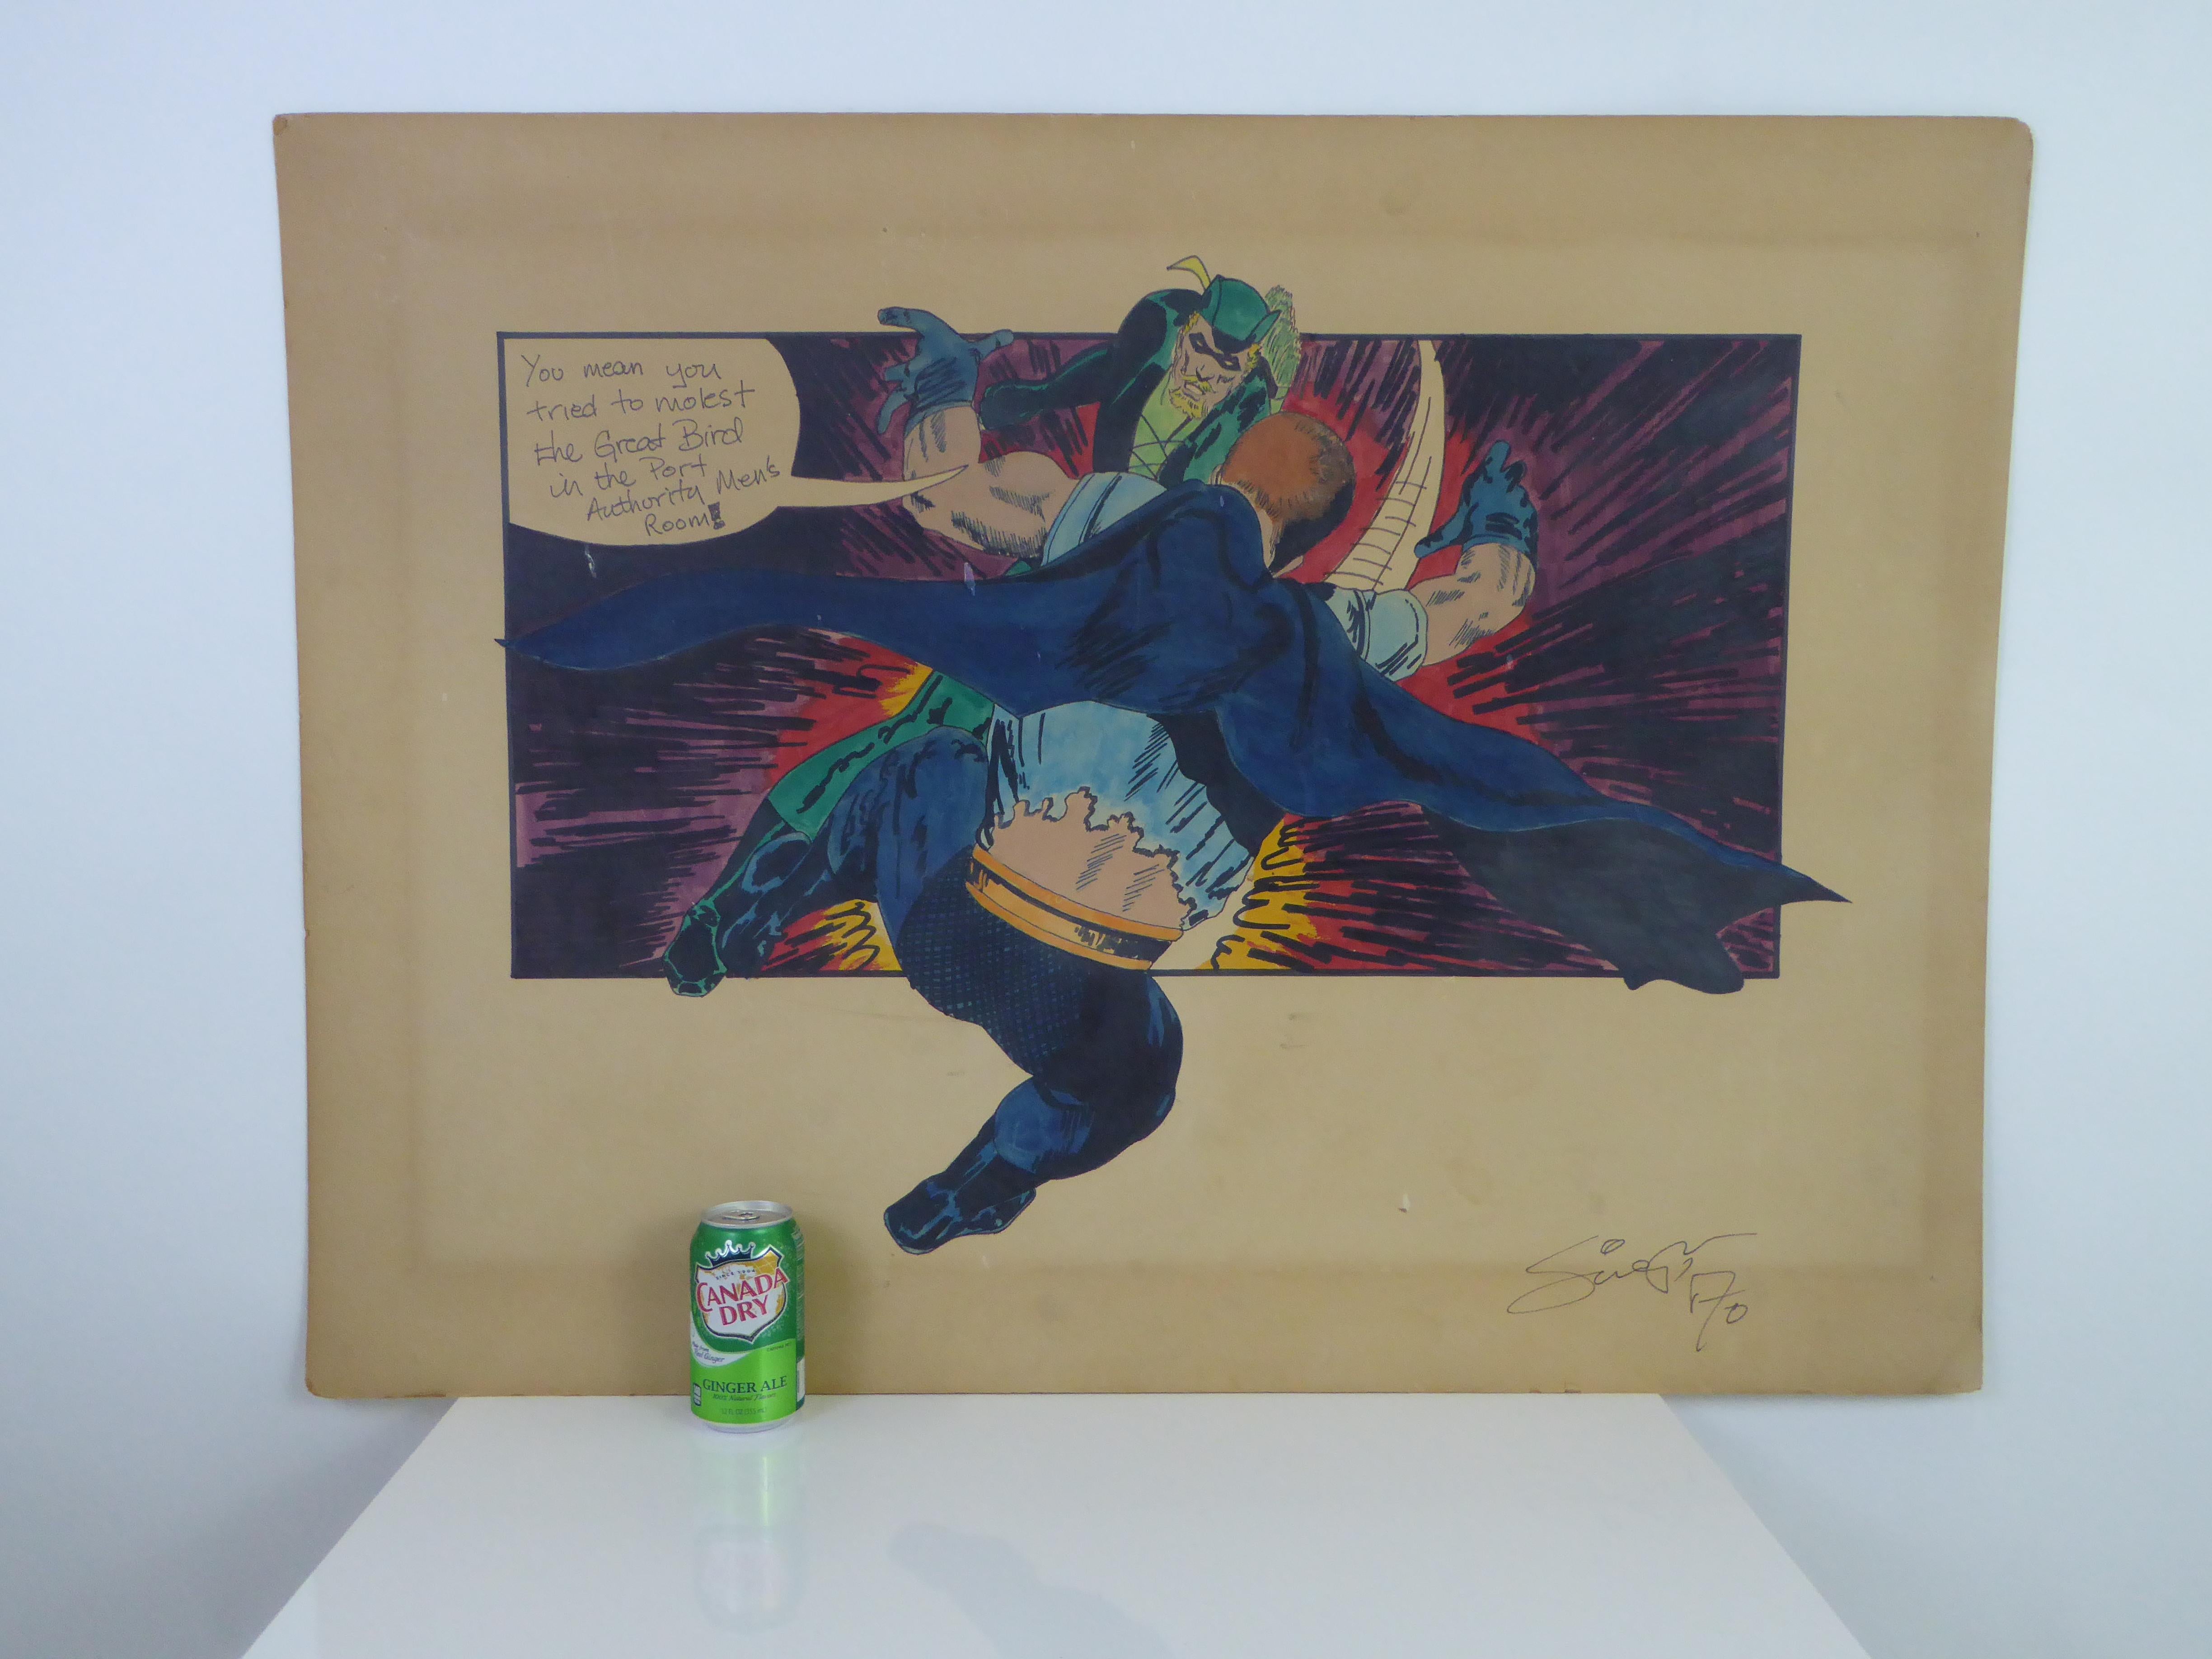 REDUCED FROM $850....In this 1970 large watercolor painting of DC comics superhero Green Arrow is teaching a lesson to the Manhunter on Port Authority men's room etiquette. Fun, campy and well painted, signed and dated on lower right side. Unable to